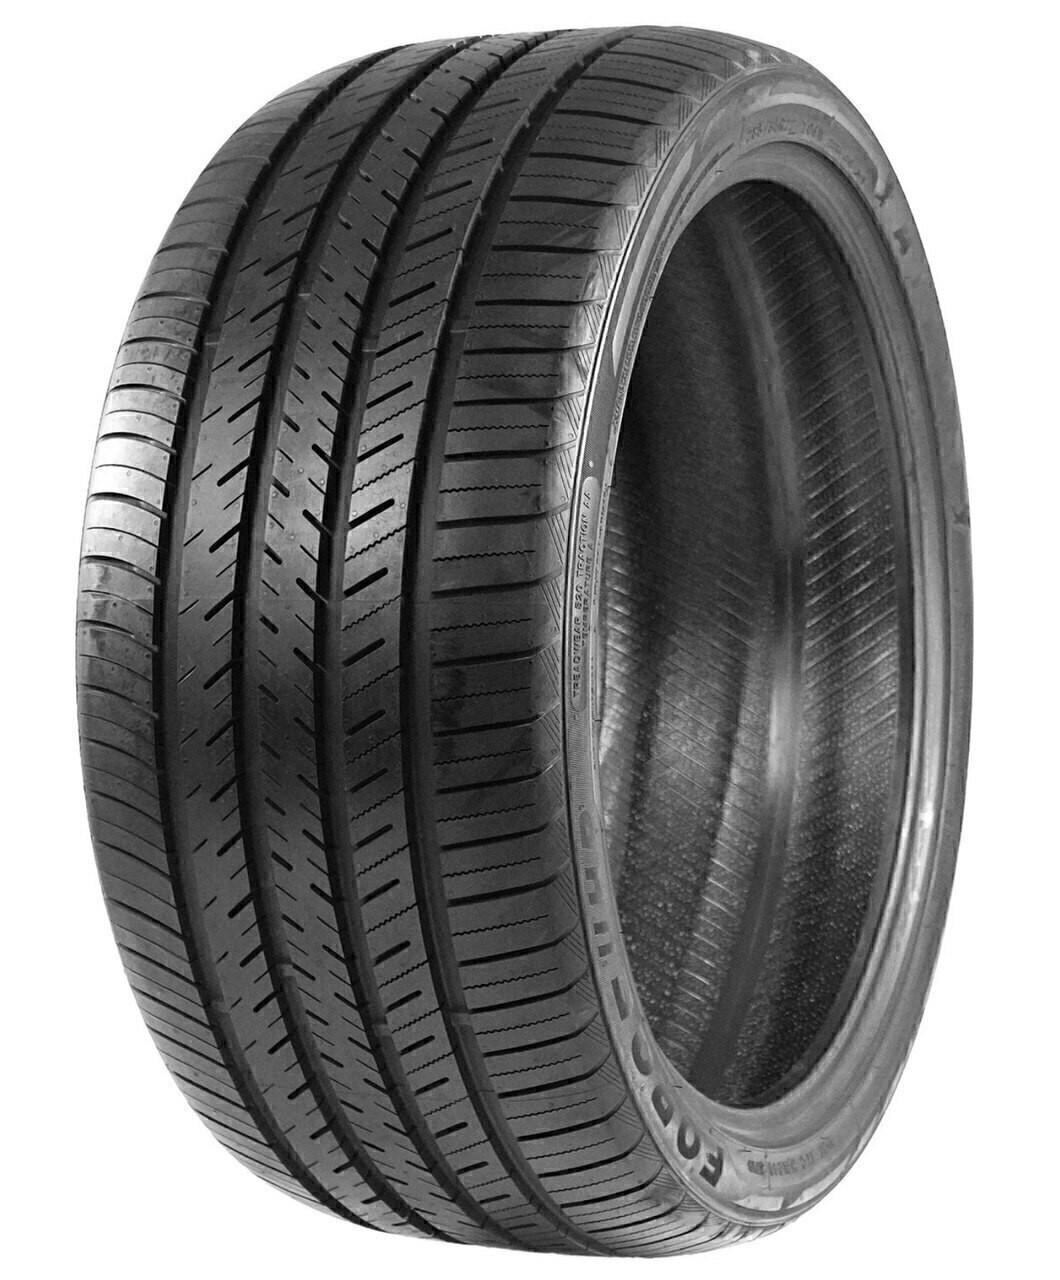 245/40R18 ATLAS FORCE UHP 97Y XL 520AA***40K***